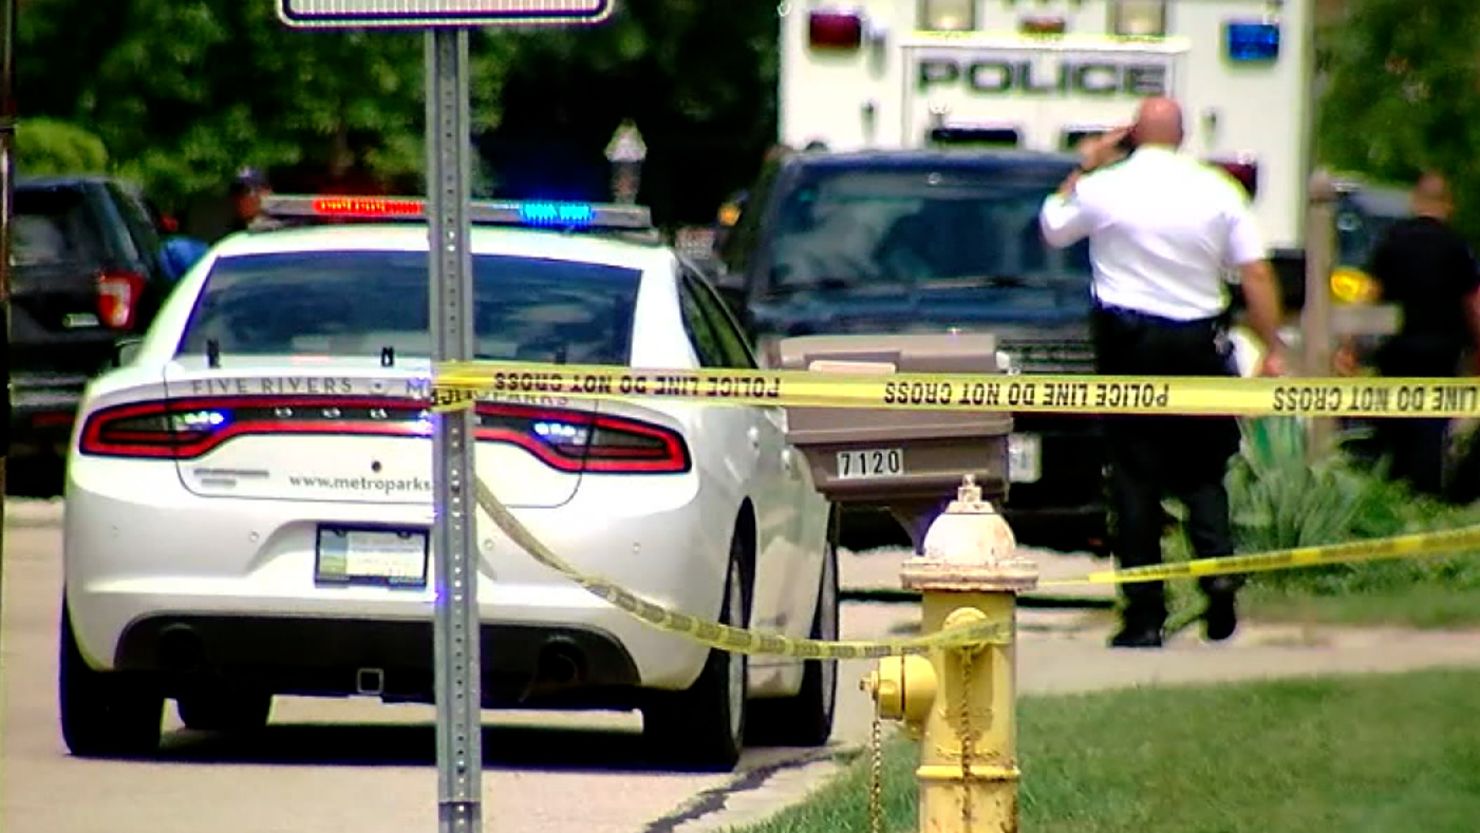 Police at one of the crime scenes on Friday after four people were fatally shot at multiple sites in a small town north of Dayton, Ohio. 